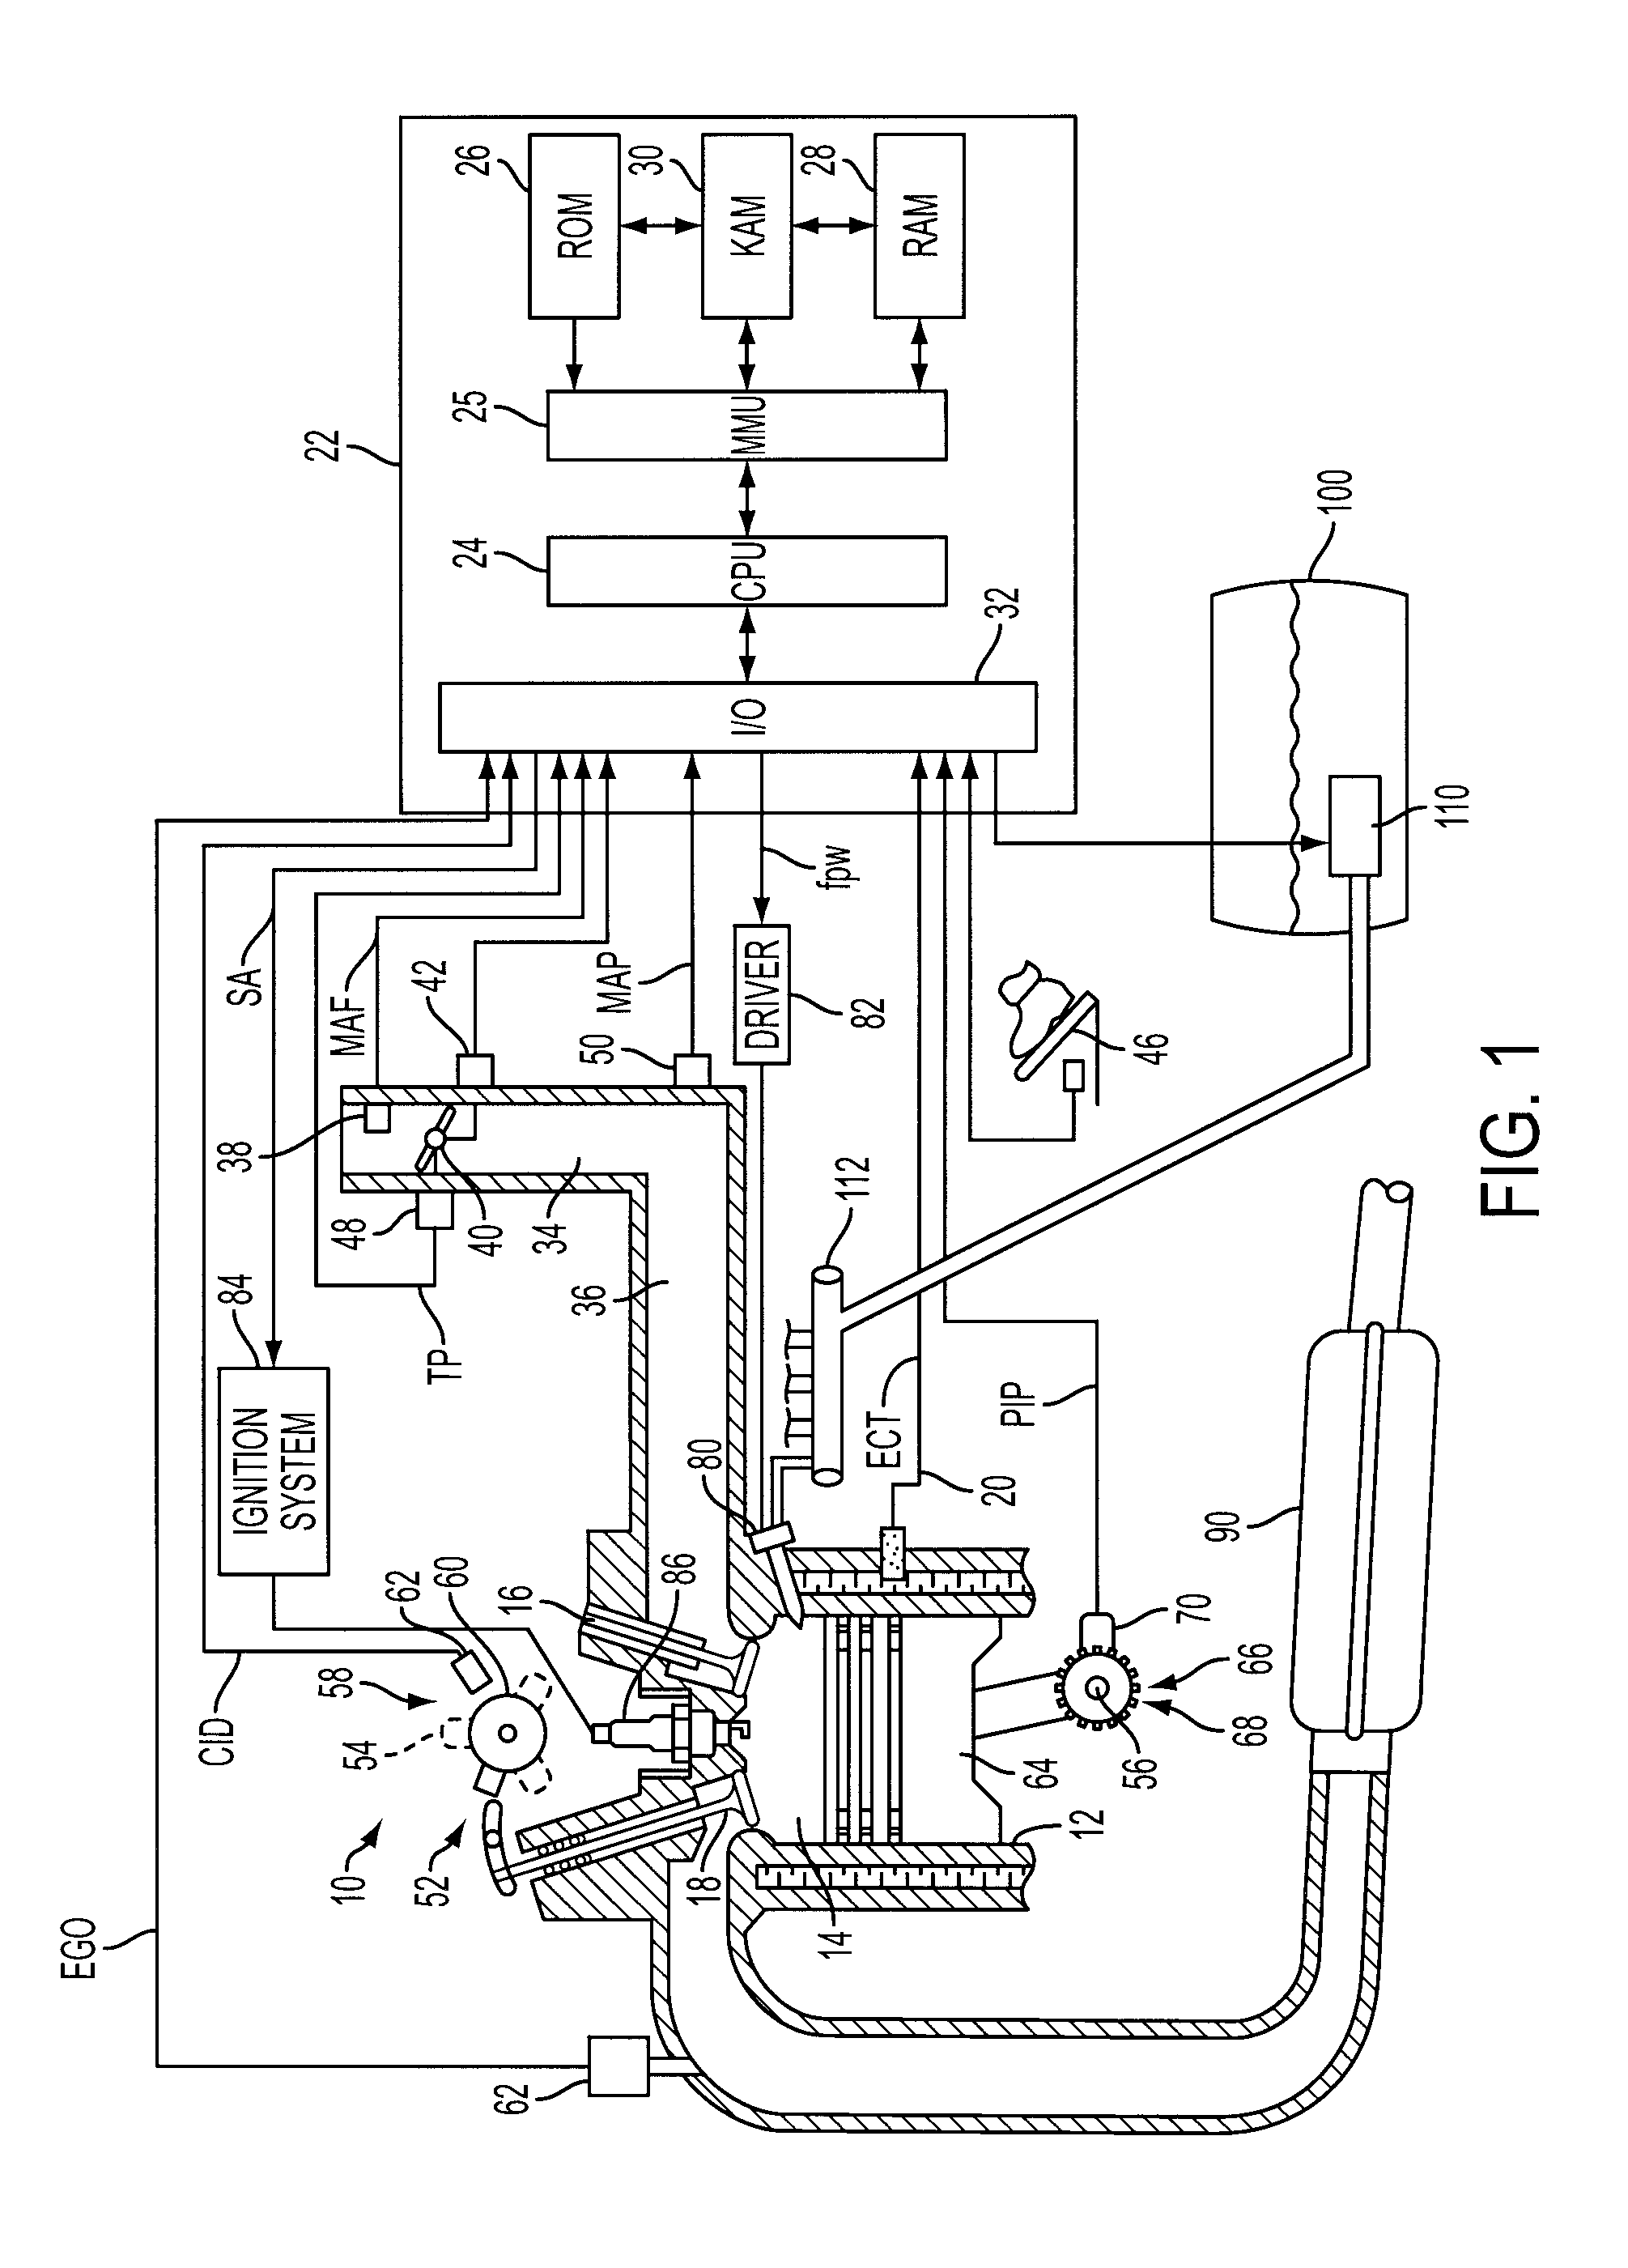 Fuel Injection Strategy For Gasoline Direct Injection Engine During High Speed/Load Operation